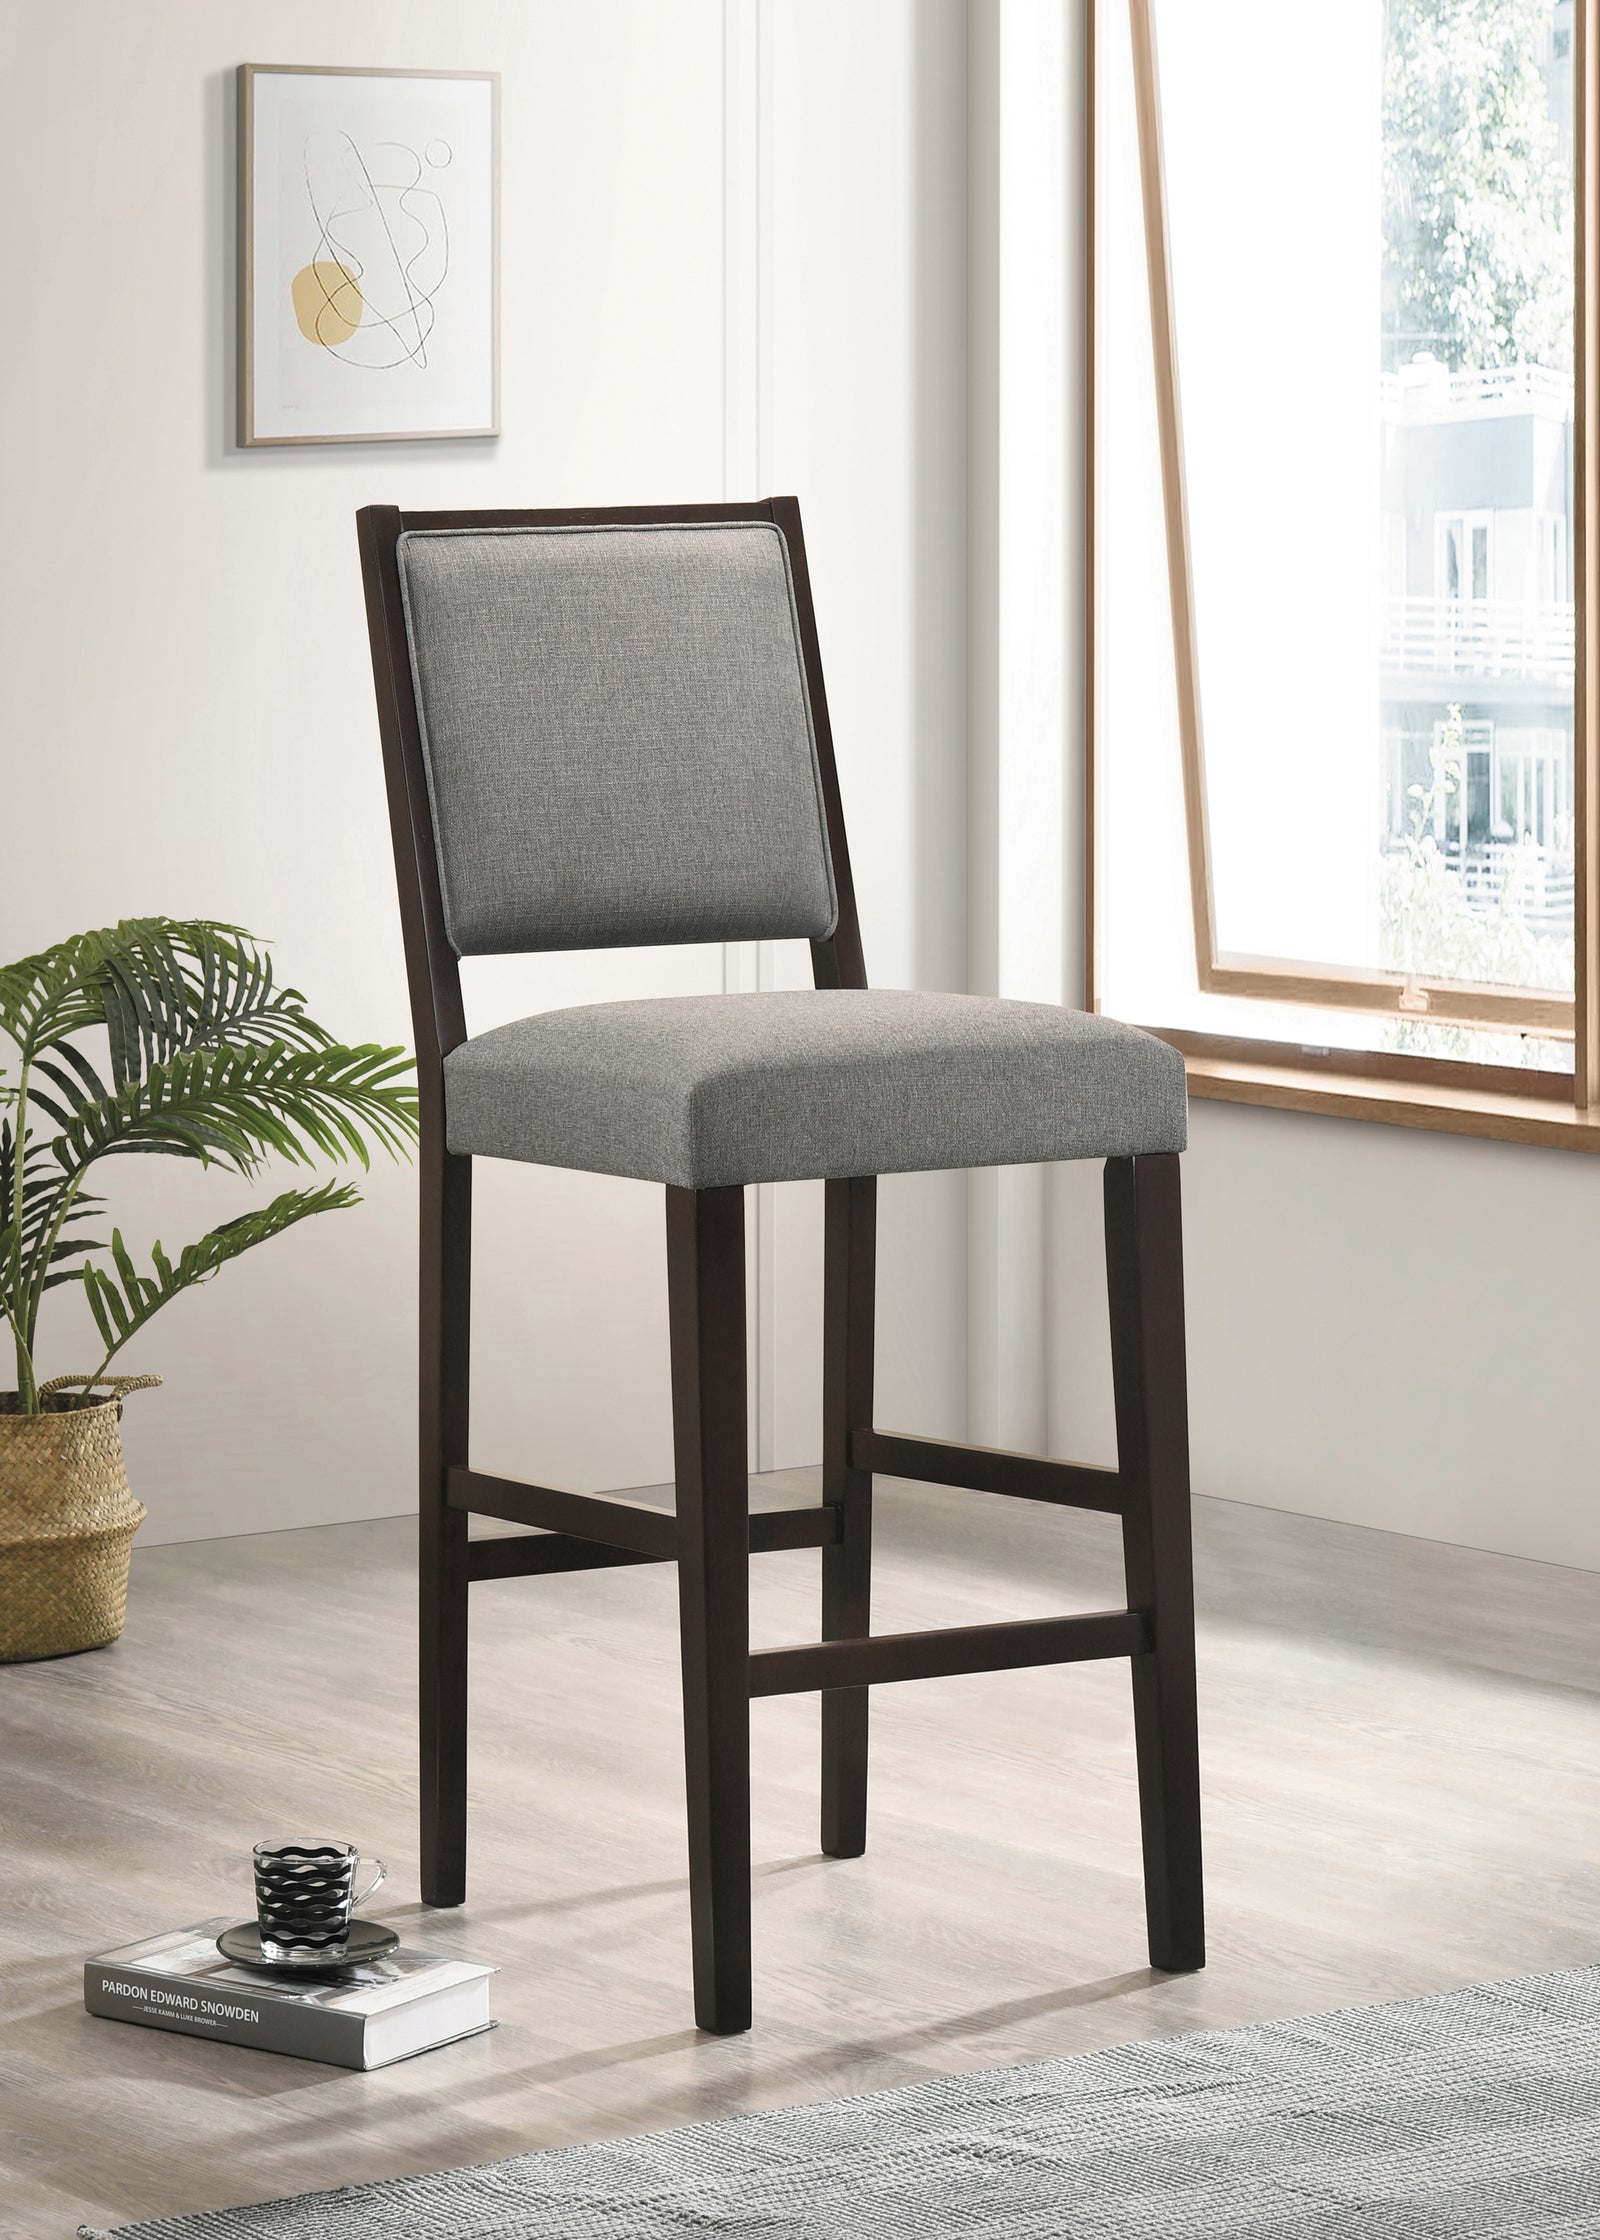 Bedford Upholstered Open Back Bar Stools With Footrest (Set Of 2) Grey And Espresso